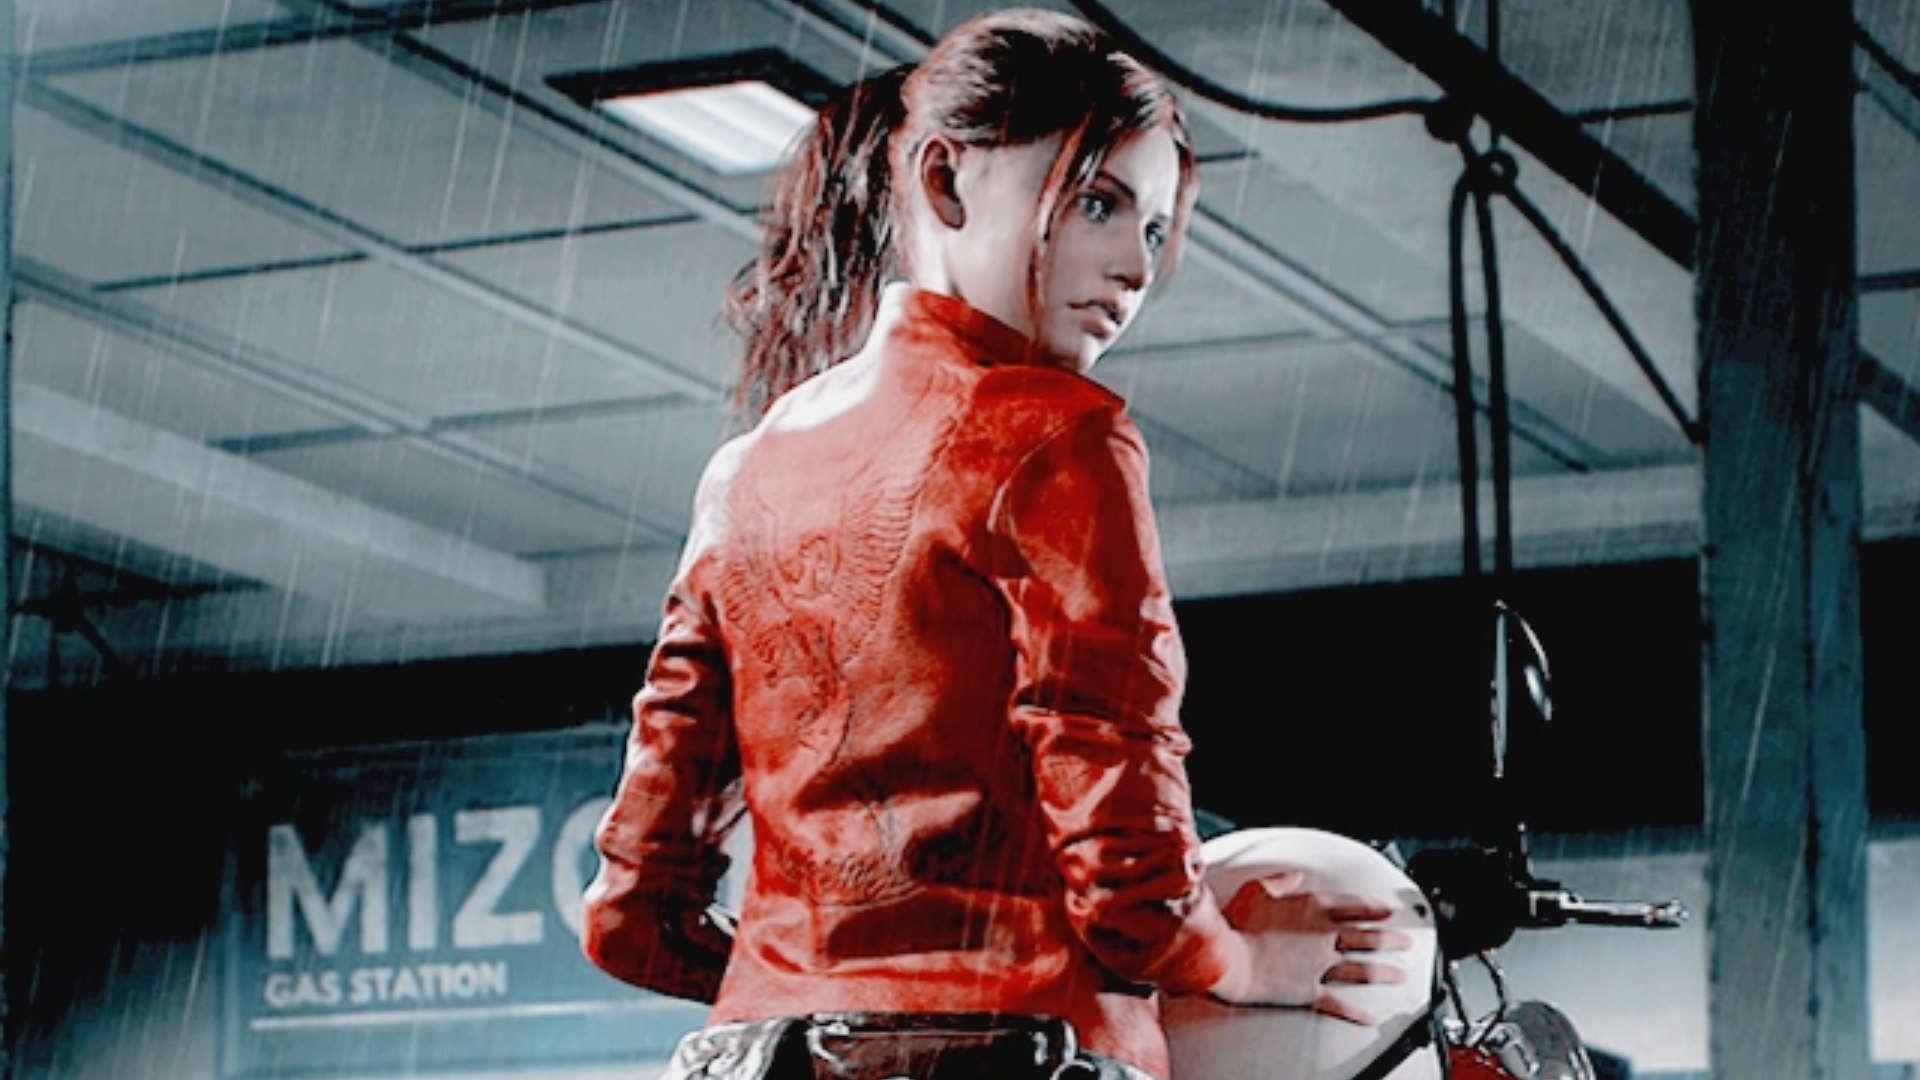 My interview with @starburst_mag is out! If your curious about my work as Claire  Redfield in the Resident Evil Franchise, about the…